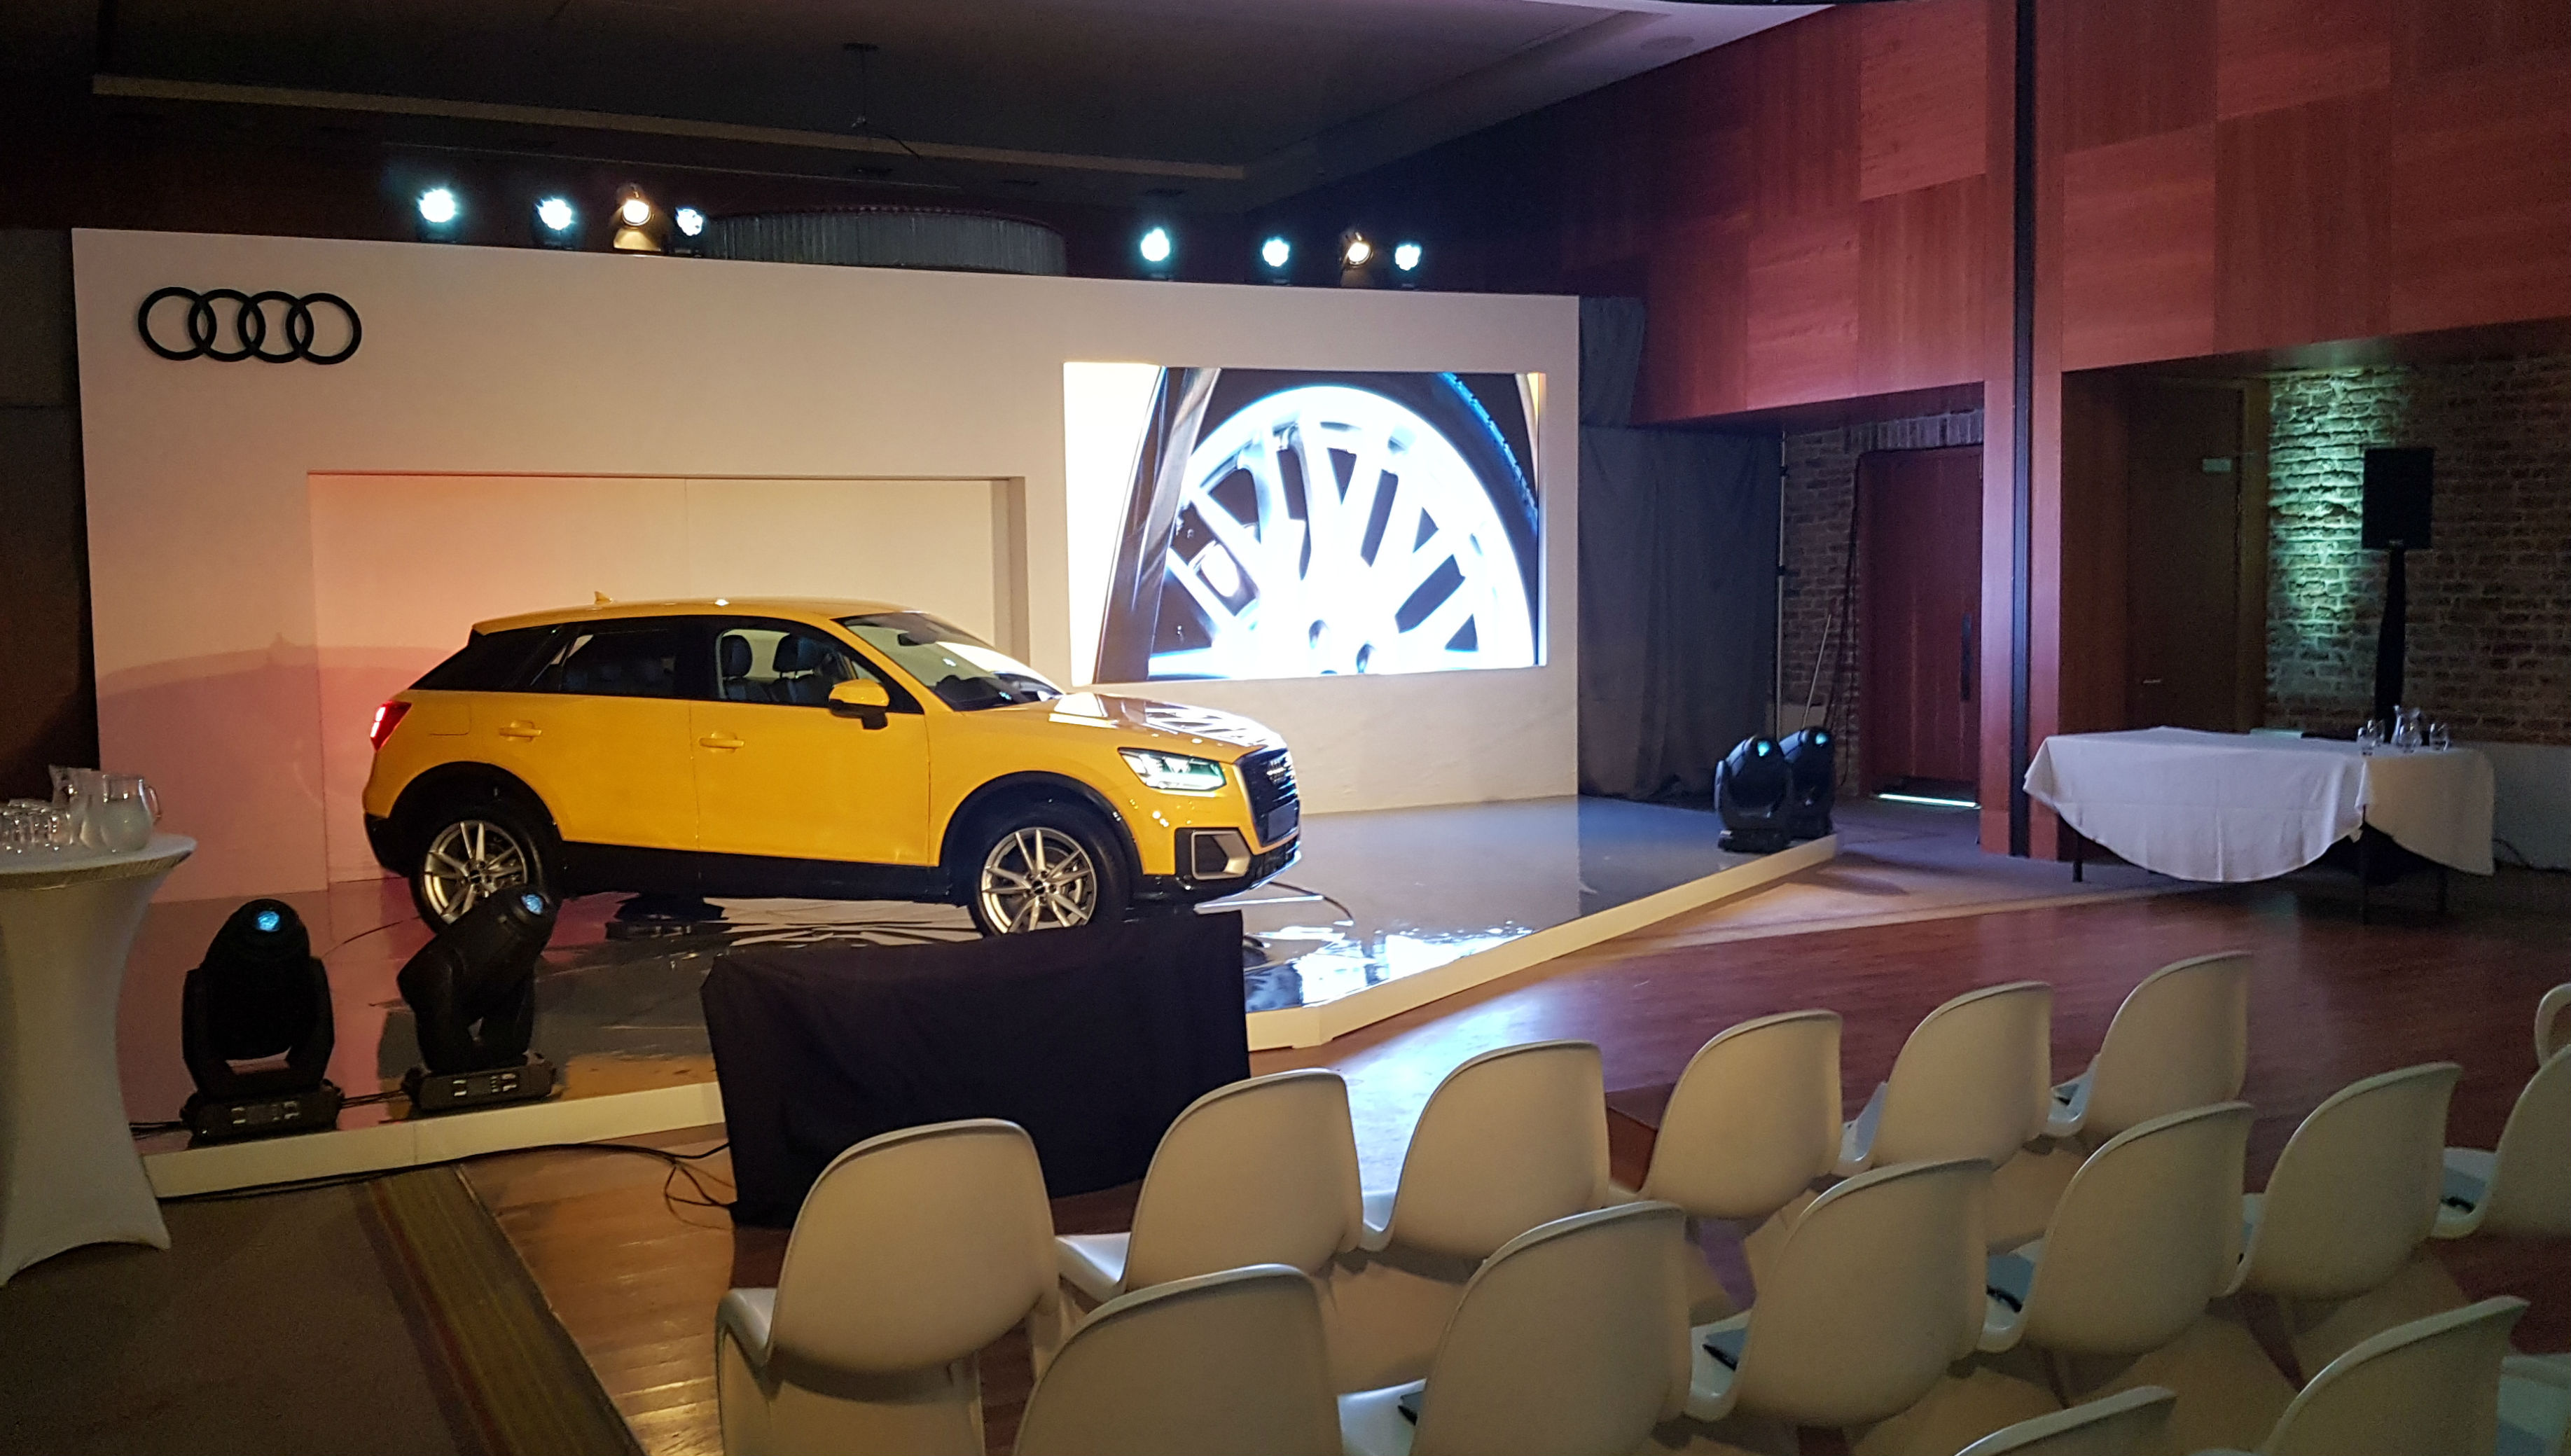 Backdrop and Revolving Stage for Audi Q2 launch in association with Pluto Events